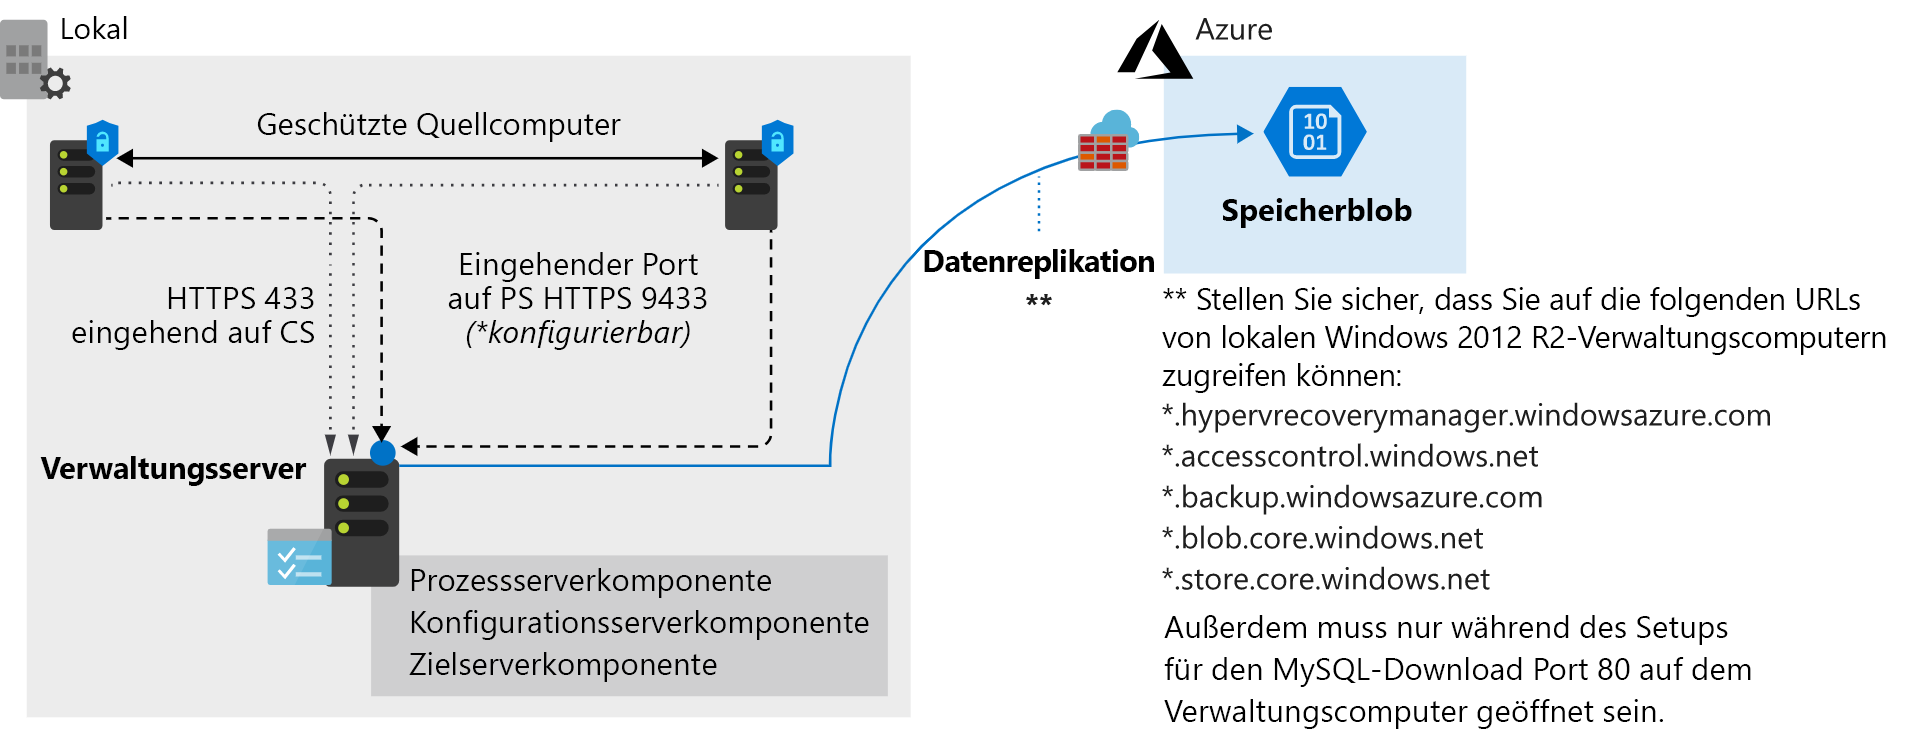 Azure Site Recovery architecture.